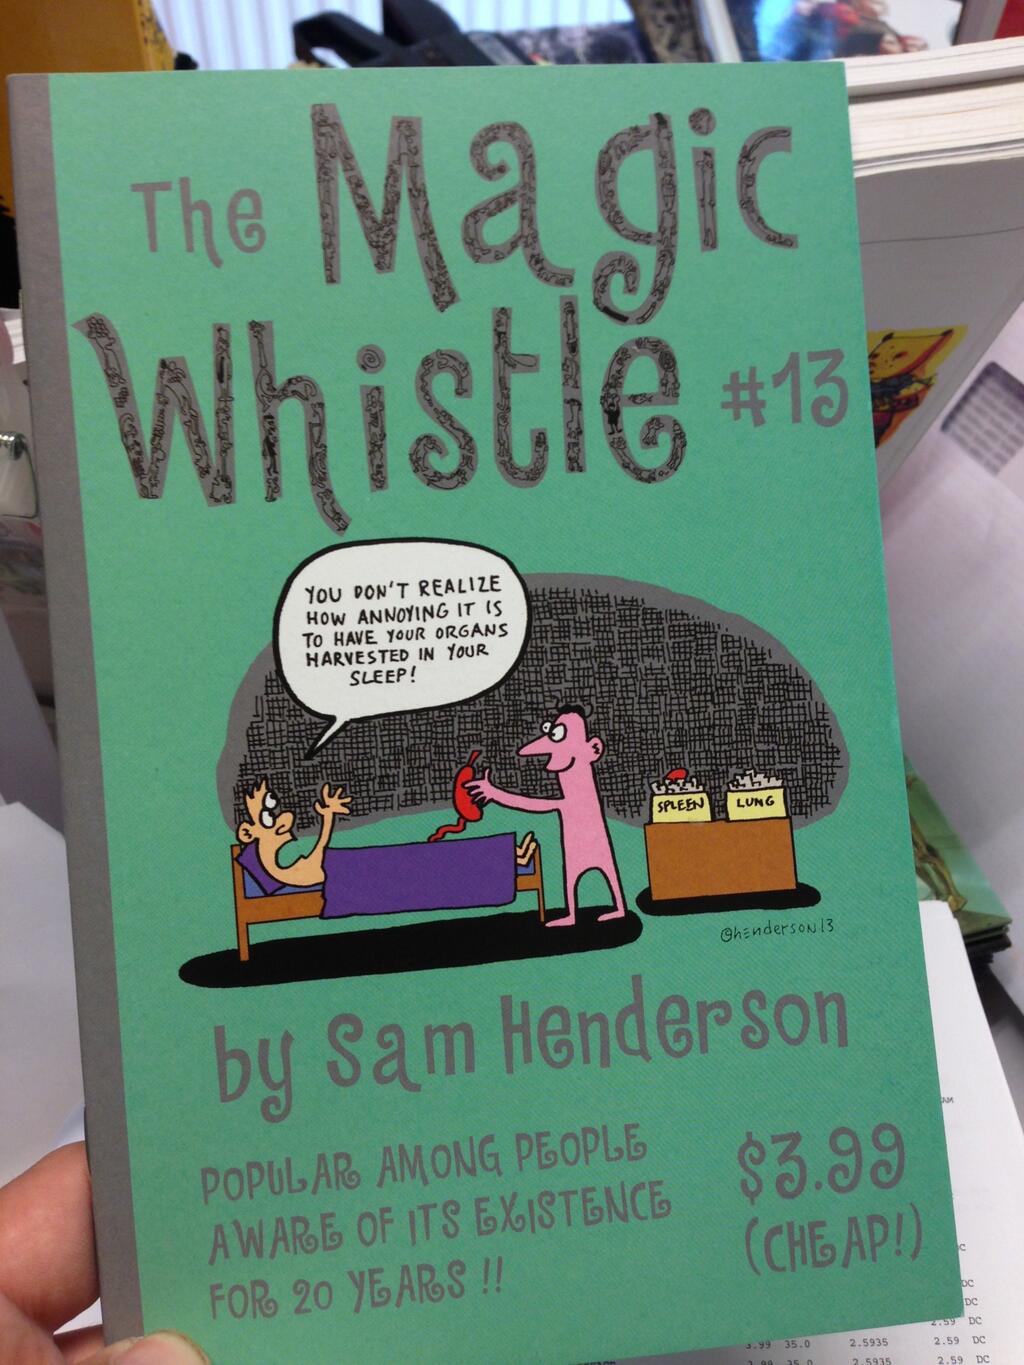 Magic Whistle 13: Proof it exists